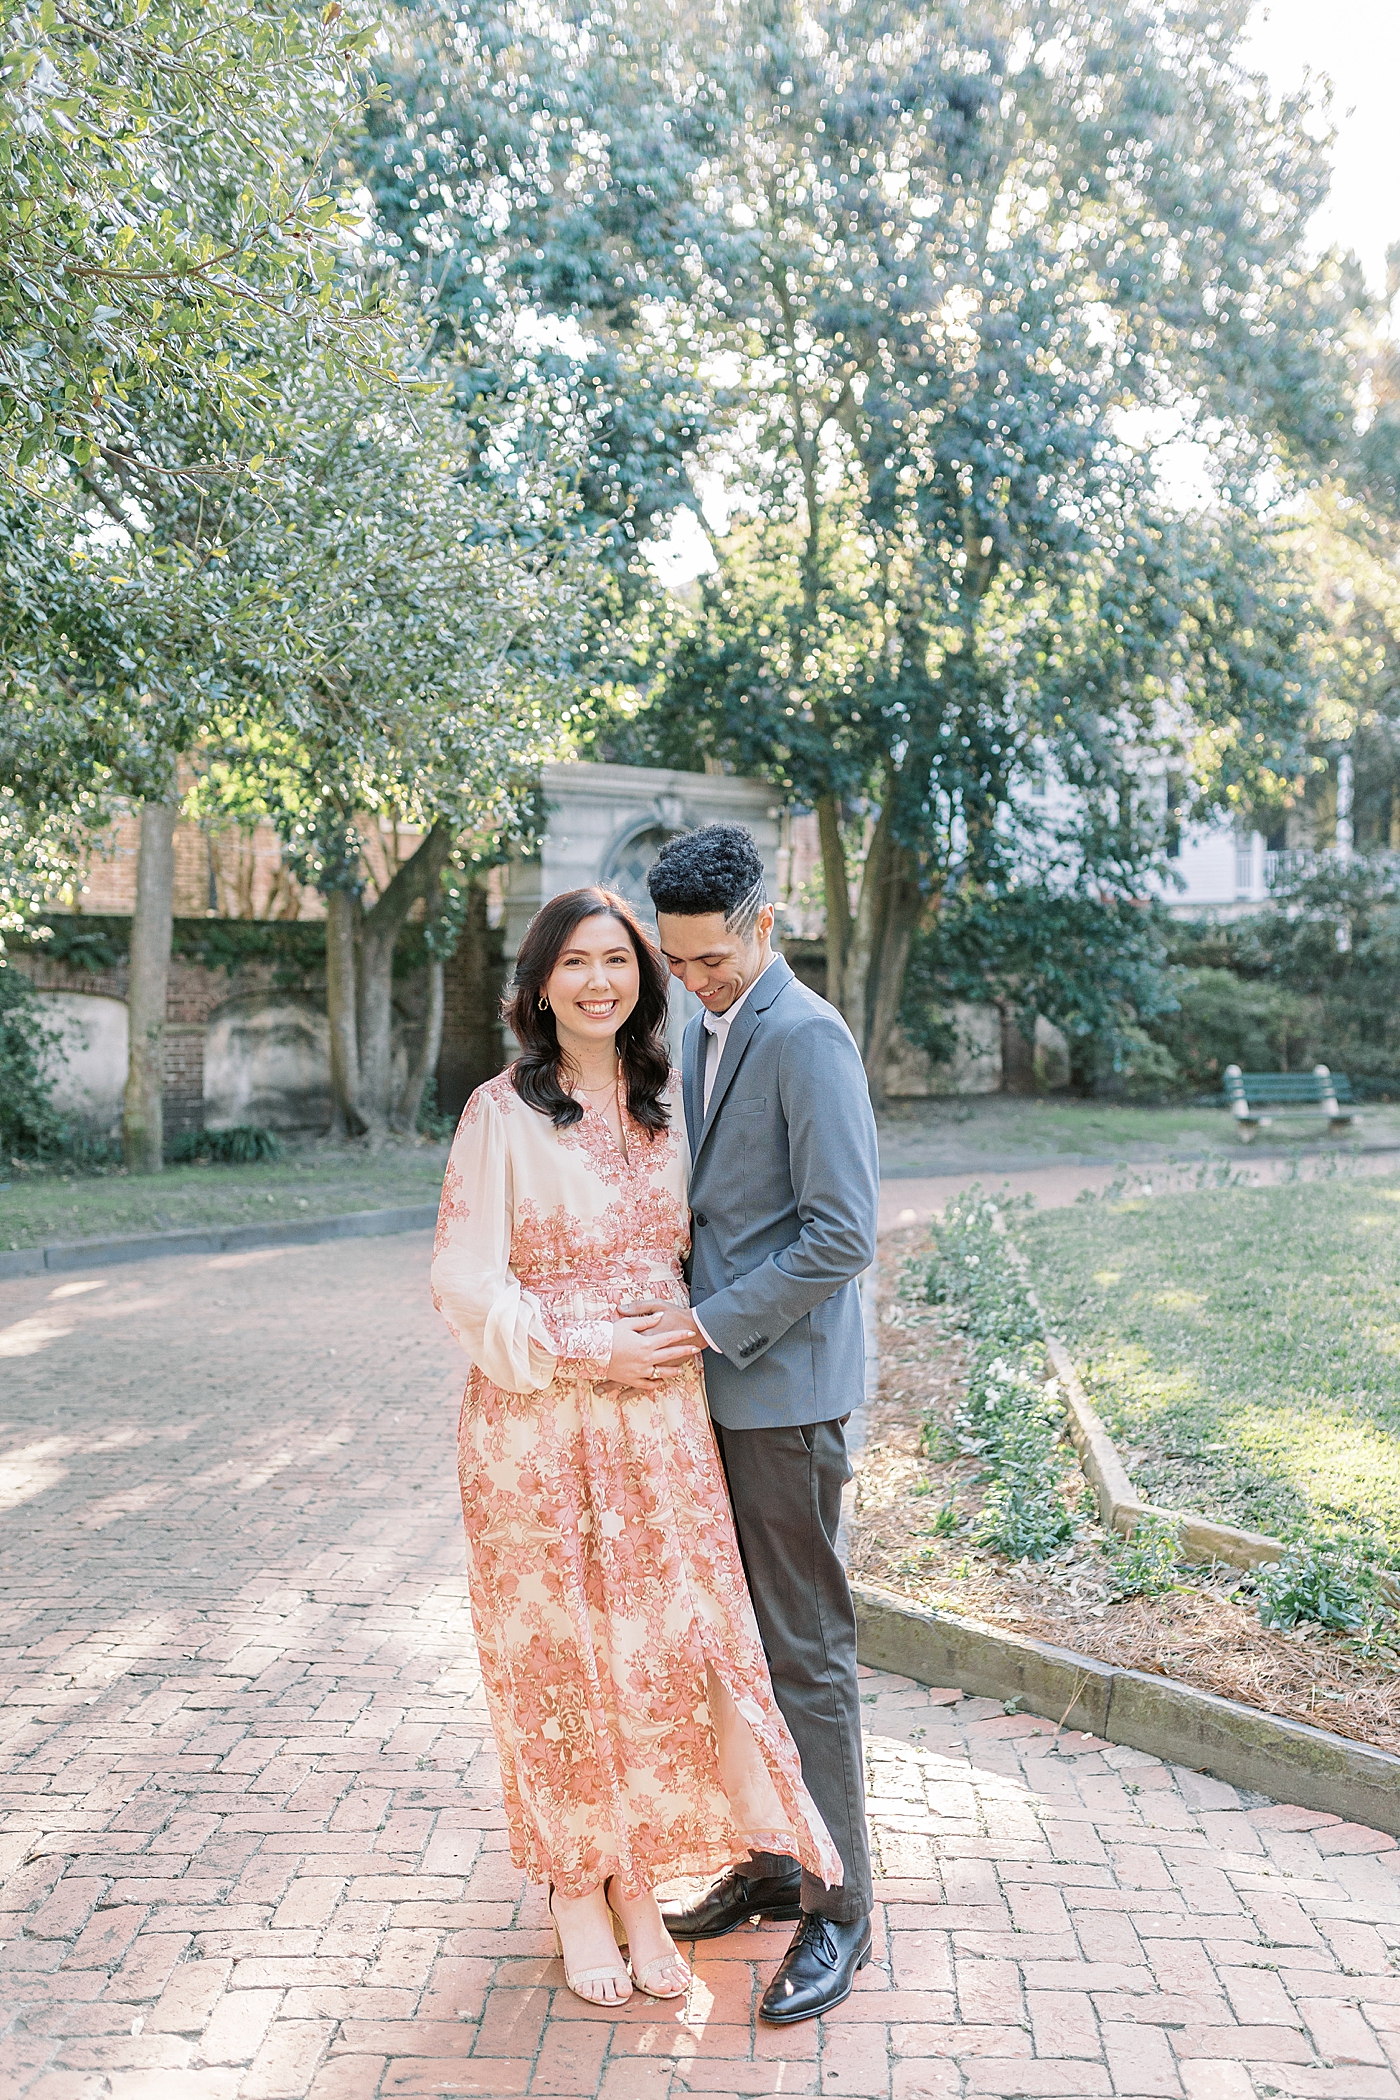 Mother and father to be snuggling a park during their Pregnancy Announcement in Downtown Charleston | Photo by Caitlyn Motycka Photography